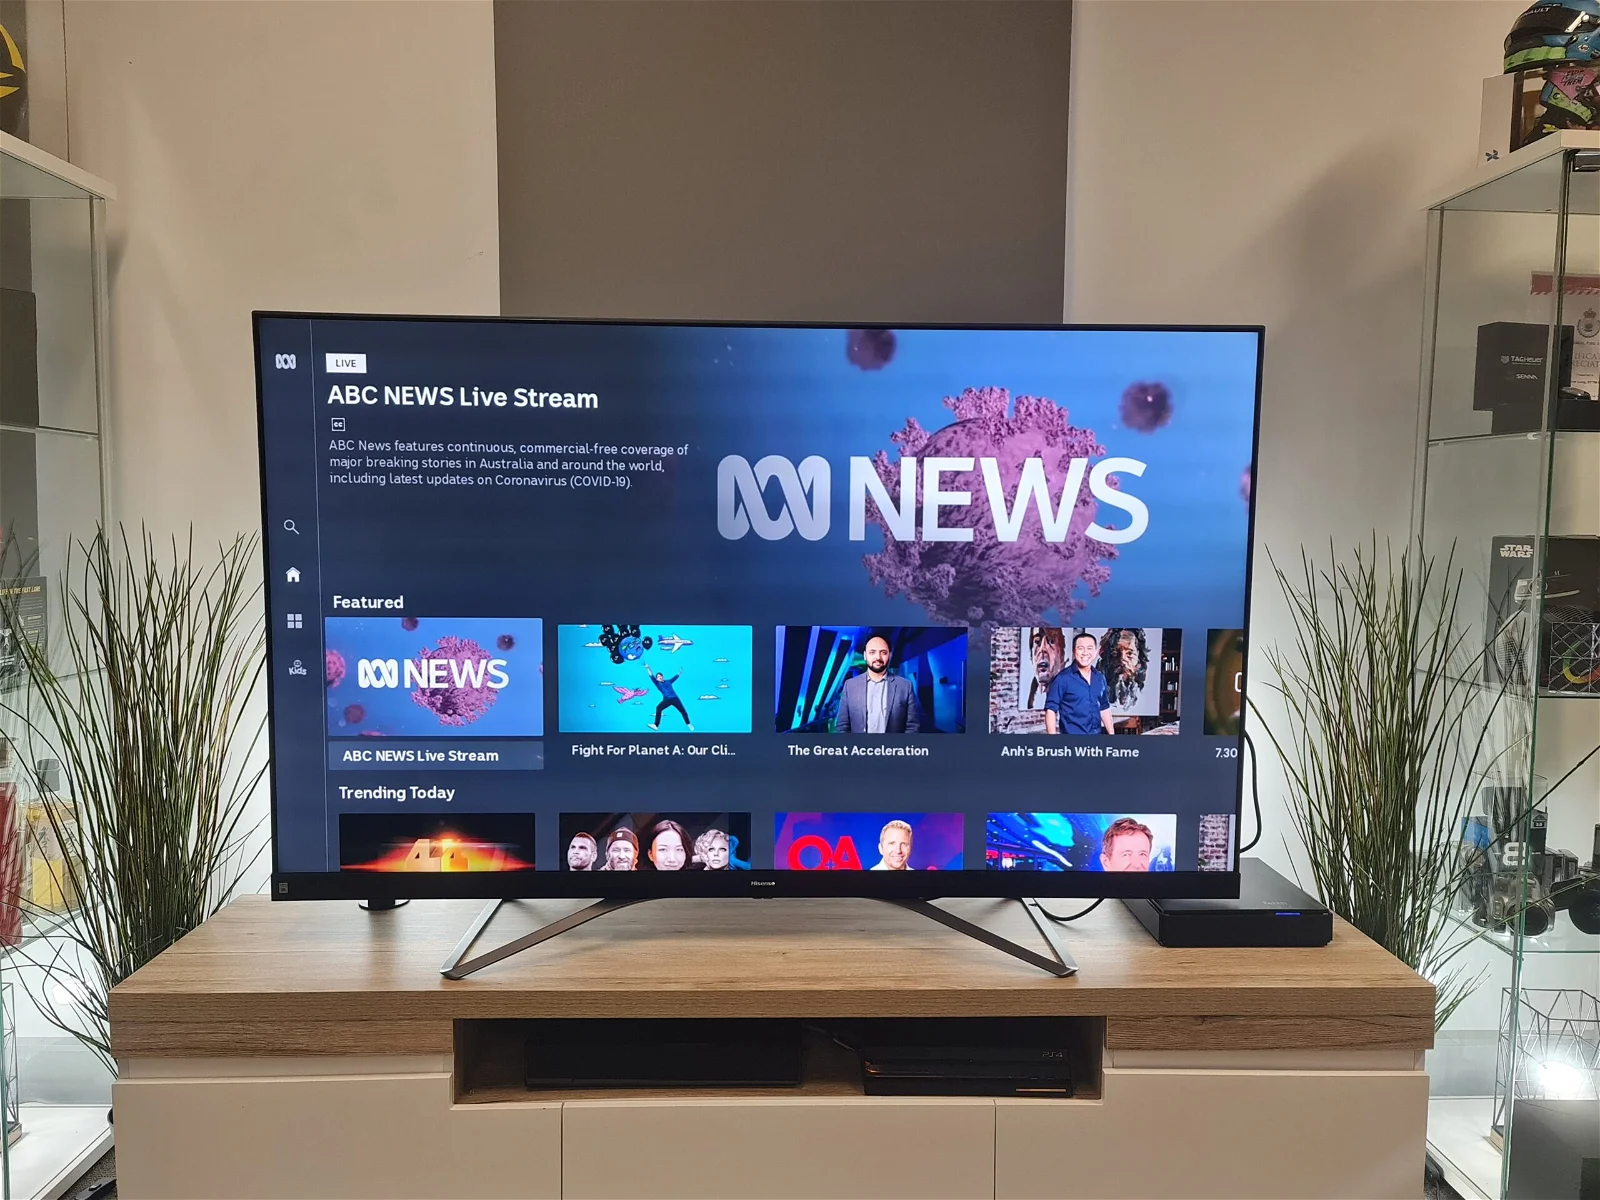 How To Download Abc App On LG Smart TV